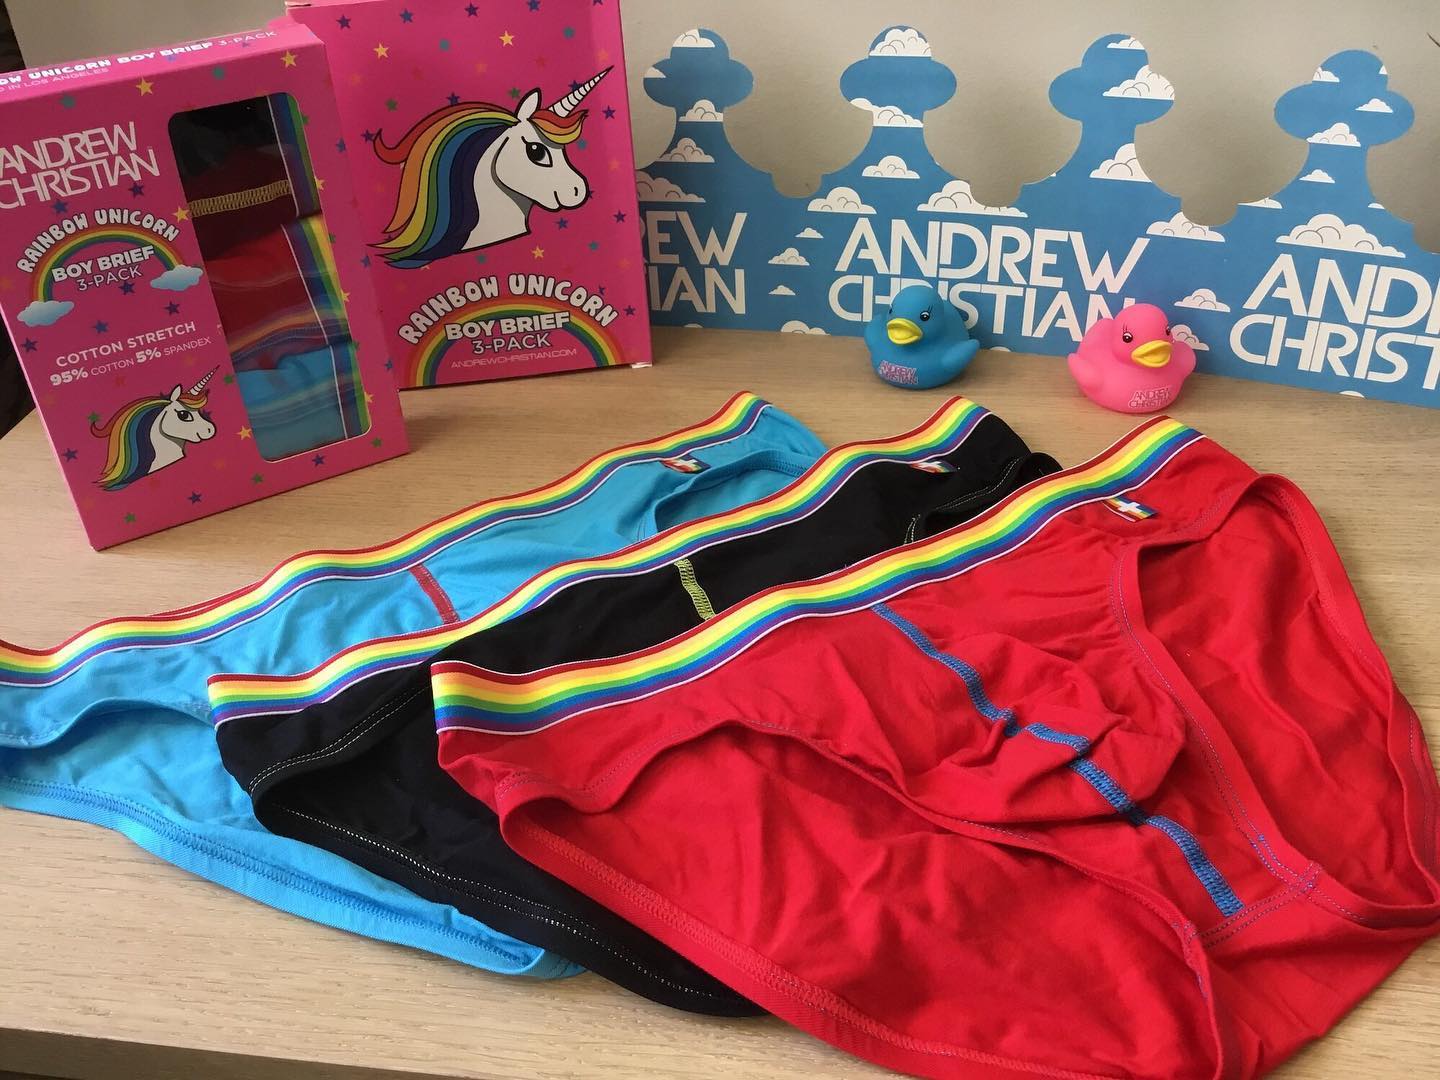 Be unique and sparkle! Get now three sexy Boy Unicorn Briefs by Andrew Christian at an absolute bargain price:
____
https://menandunderwear.com/shop/underwear/andrew-christian-boy-brief-unicorn-3-pack-w-almost-naked-2